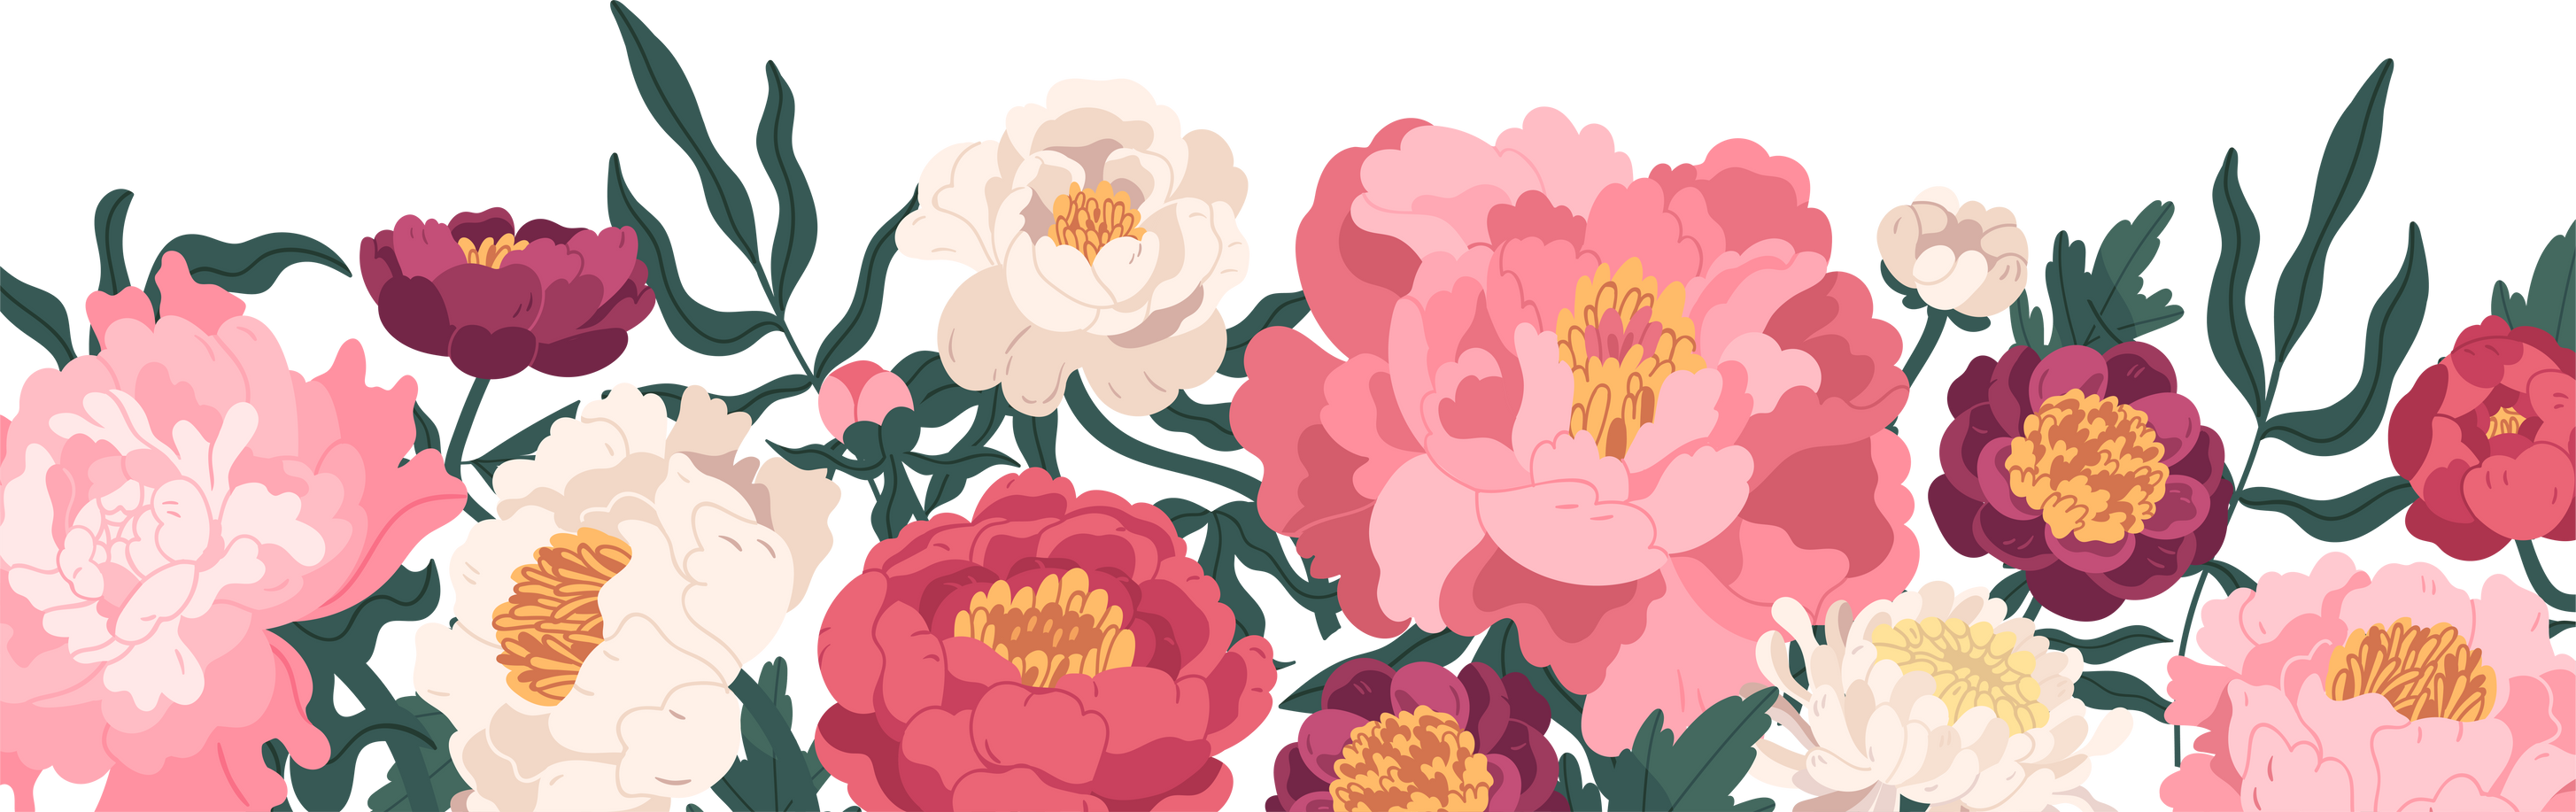 Horizontal floral backdrop with border of delicate blossomed spring peonies flowers. Botanical flat vector illustration.